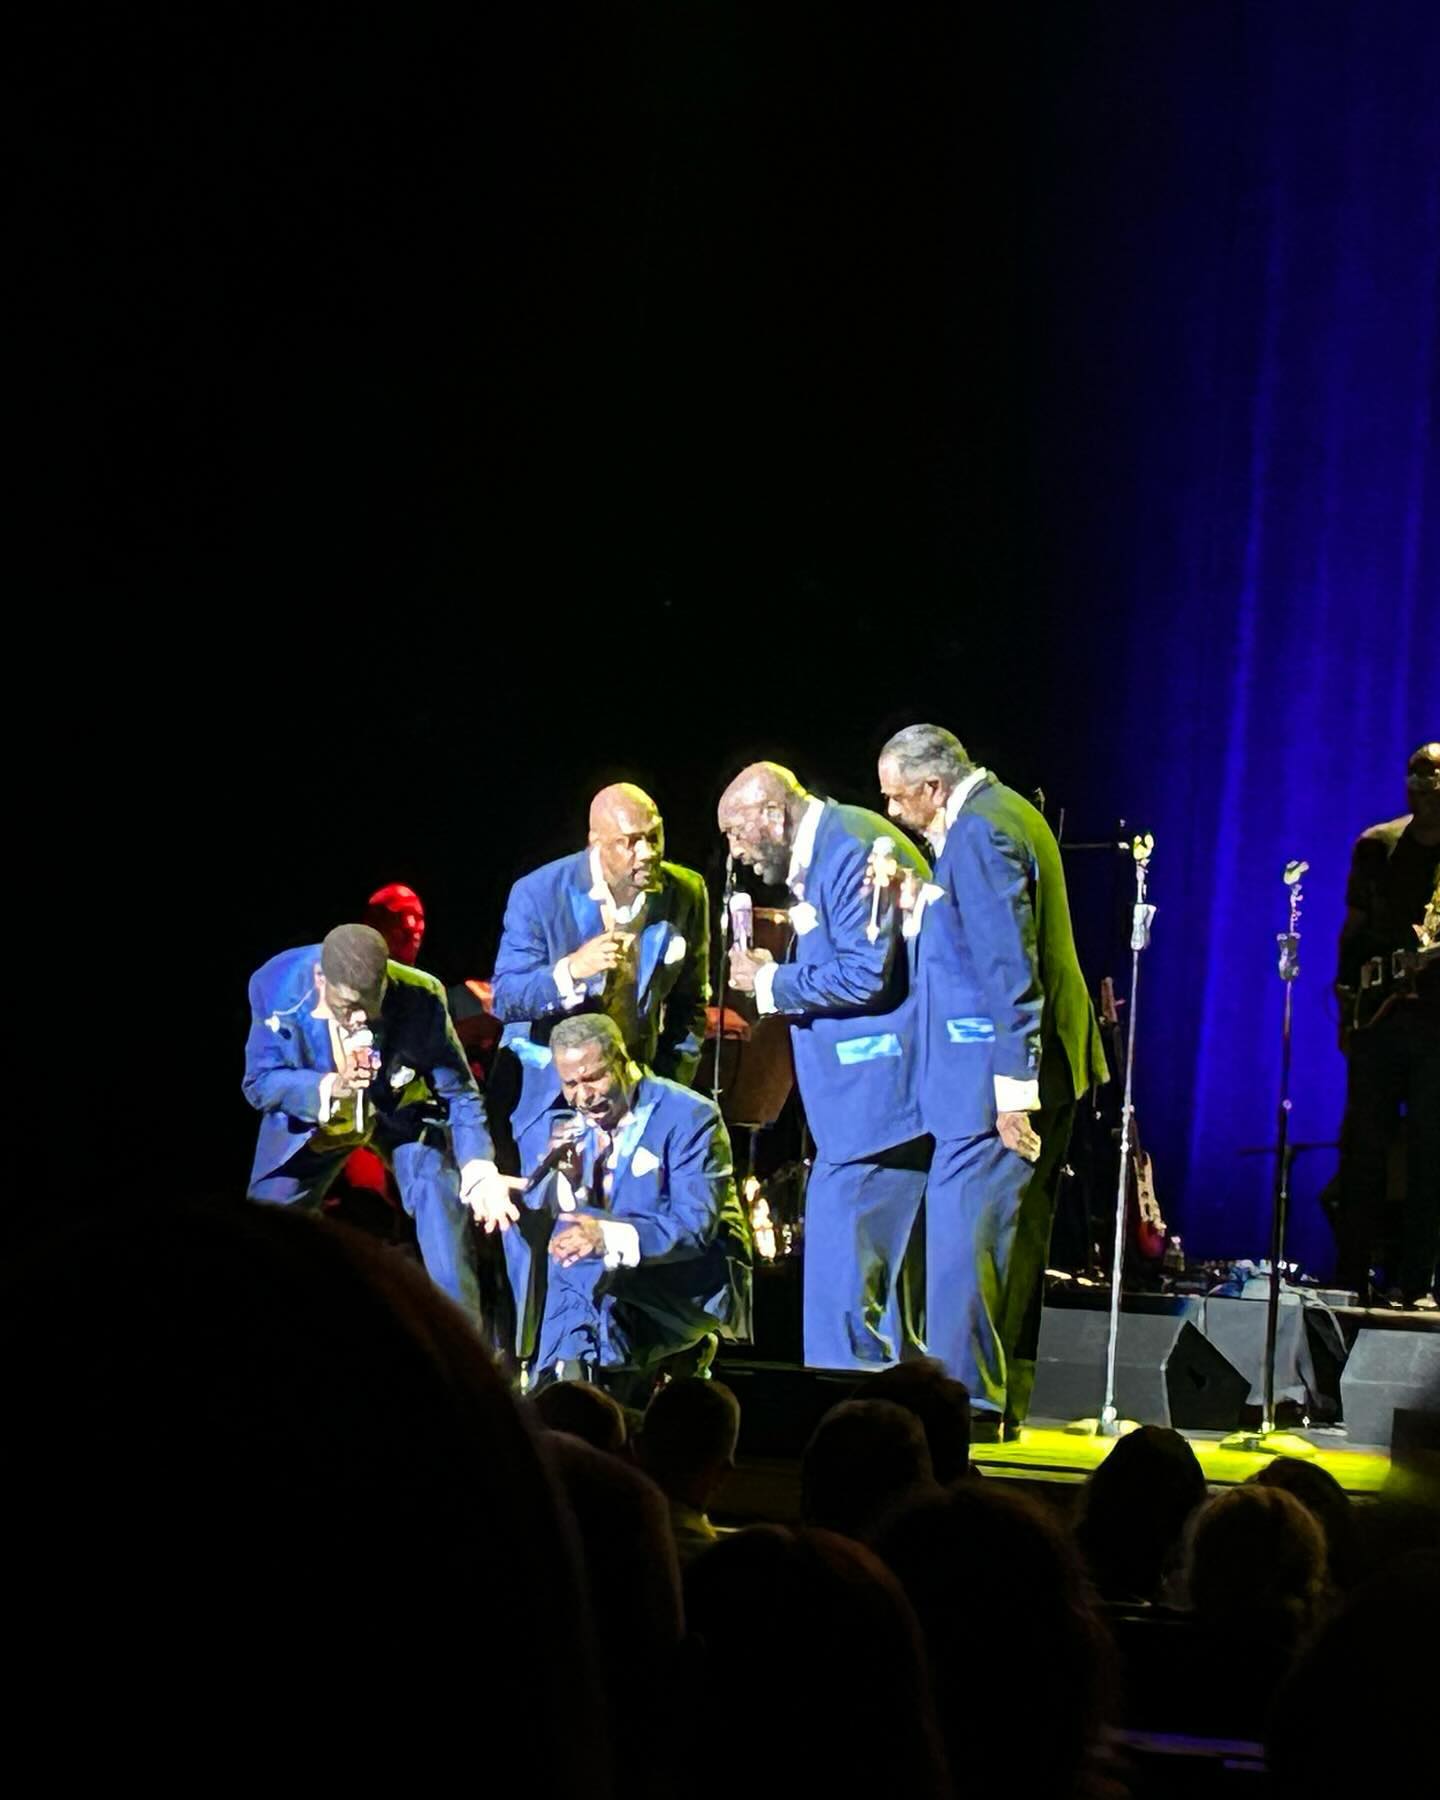 Seeing the 4 Tops & The Temptations in concert was one of the most legendary concerts I’ve ever attended in my life! Only 1 original member for each group, the rest have passed away. 🙏🏽 Abdul “Duke” Fakir, 88 from the 4 Tops & Otis Williams, 82 from The Temptations 💕 grew up on oldies music! 3WS every morning during breakfast & trips to Northern Lights in the 80s & early 90s made us fall in love with the oldies! Nothing is like it & no other music could ever compare! Proud to say Ive seen at least 1 original Motown legend! 

4 Tops is in white 🤍
The Temptations is in blue 💙